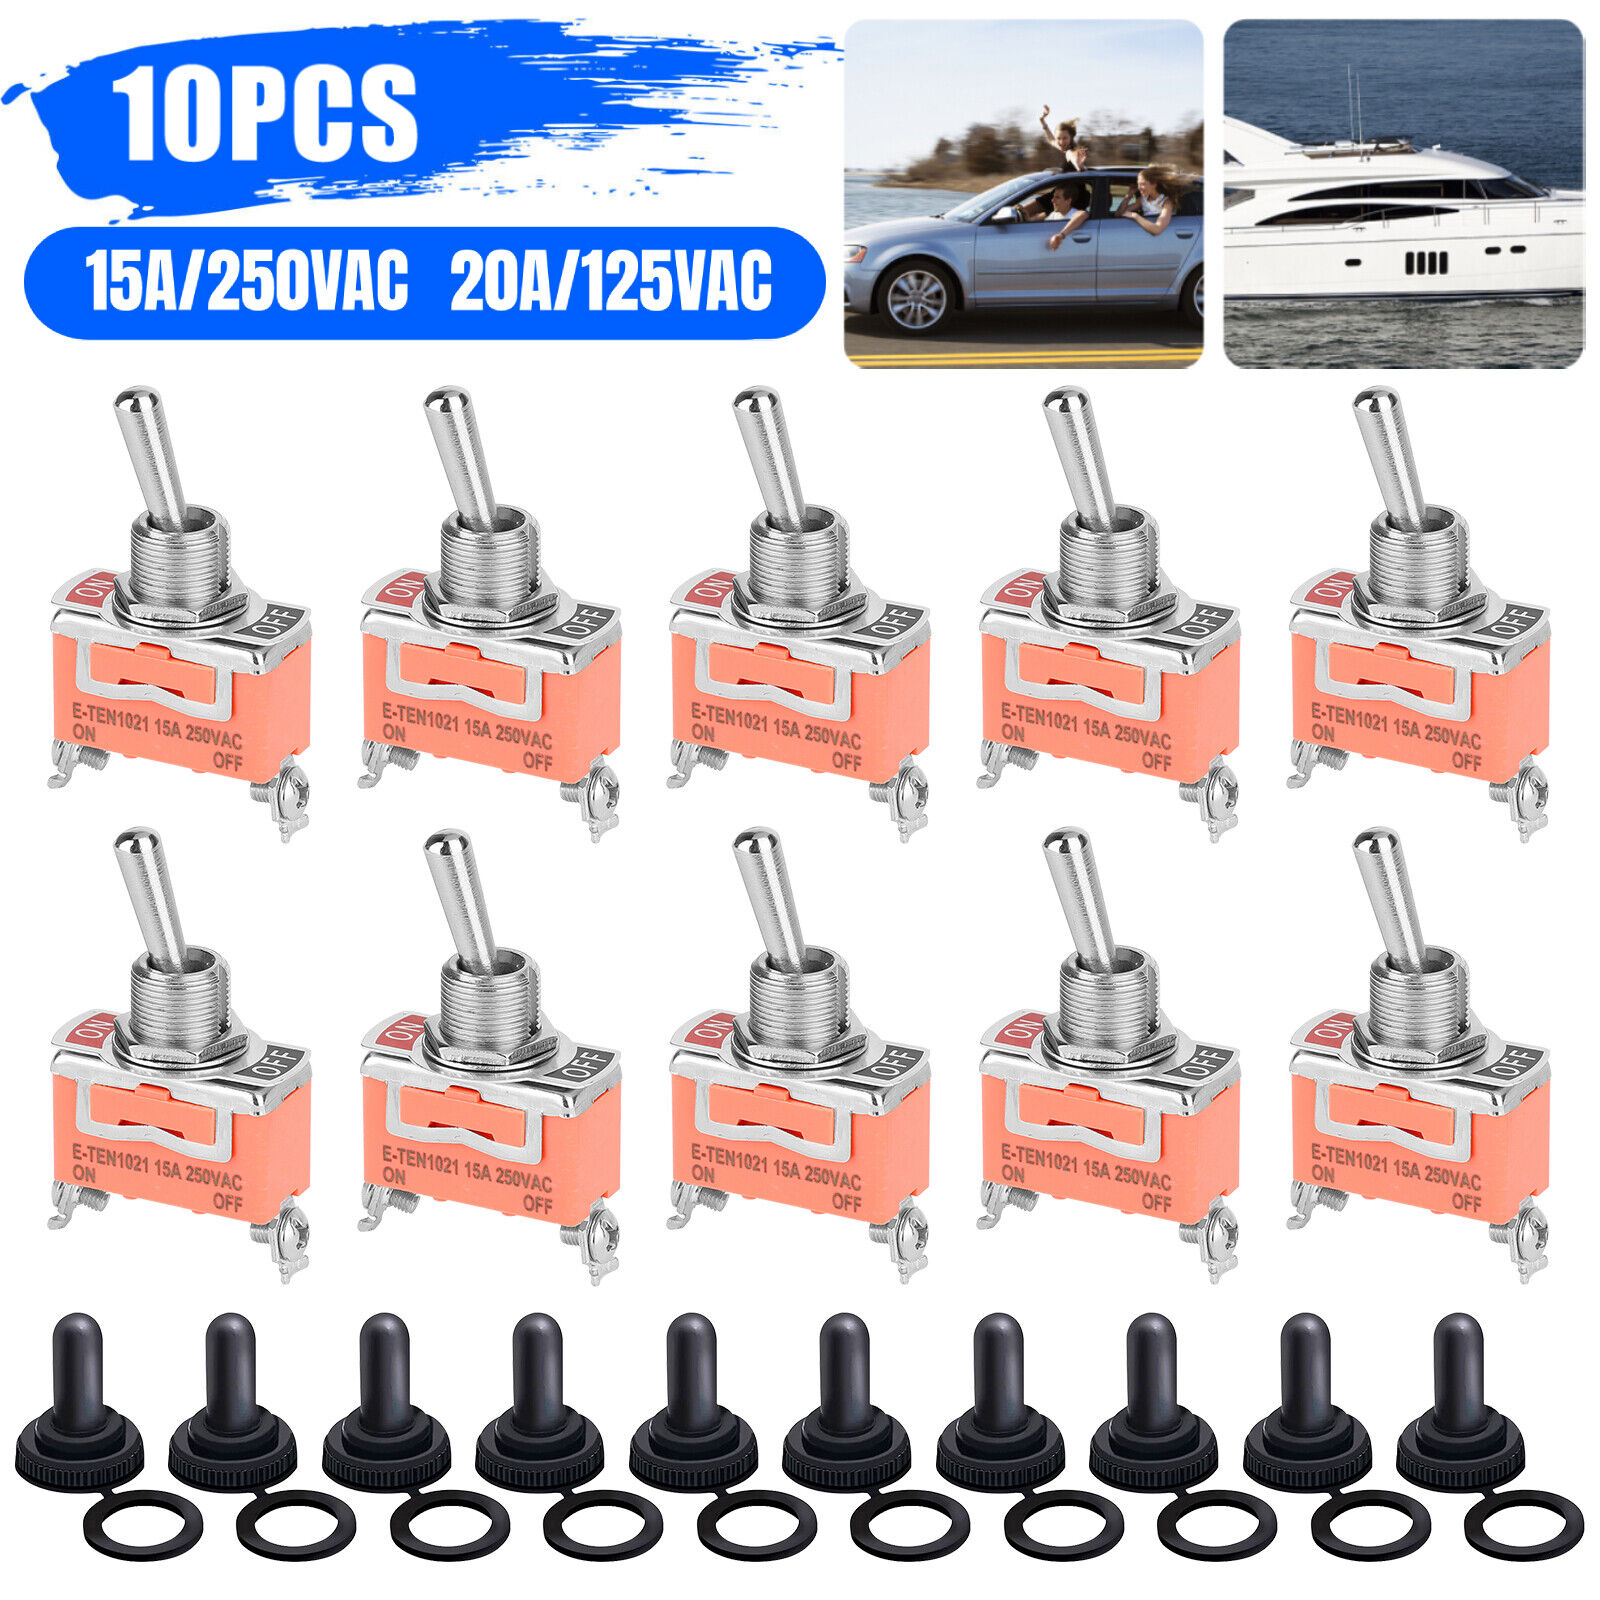 10X Toggle Switch ON/OFF Heavy Duty 15A 250V SPST 2 Terminal Car ATV Waterproof